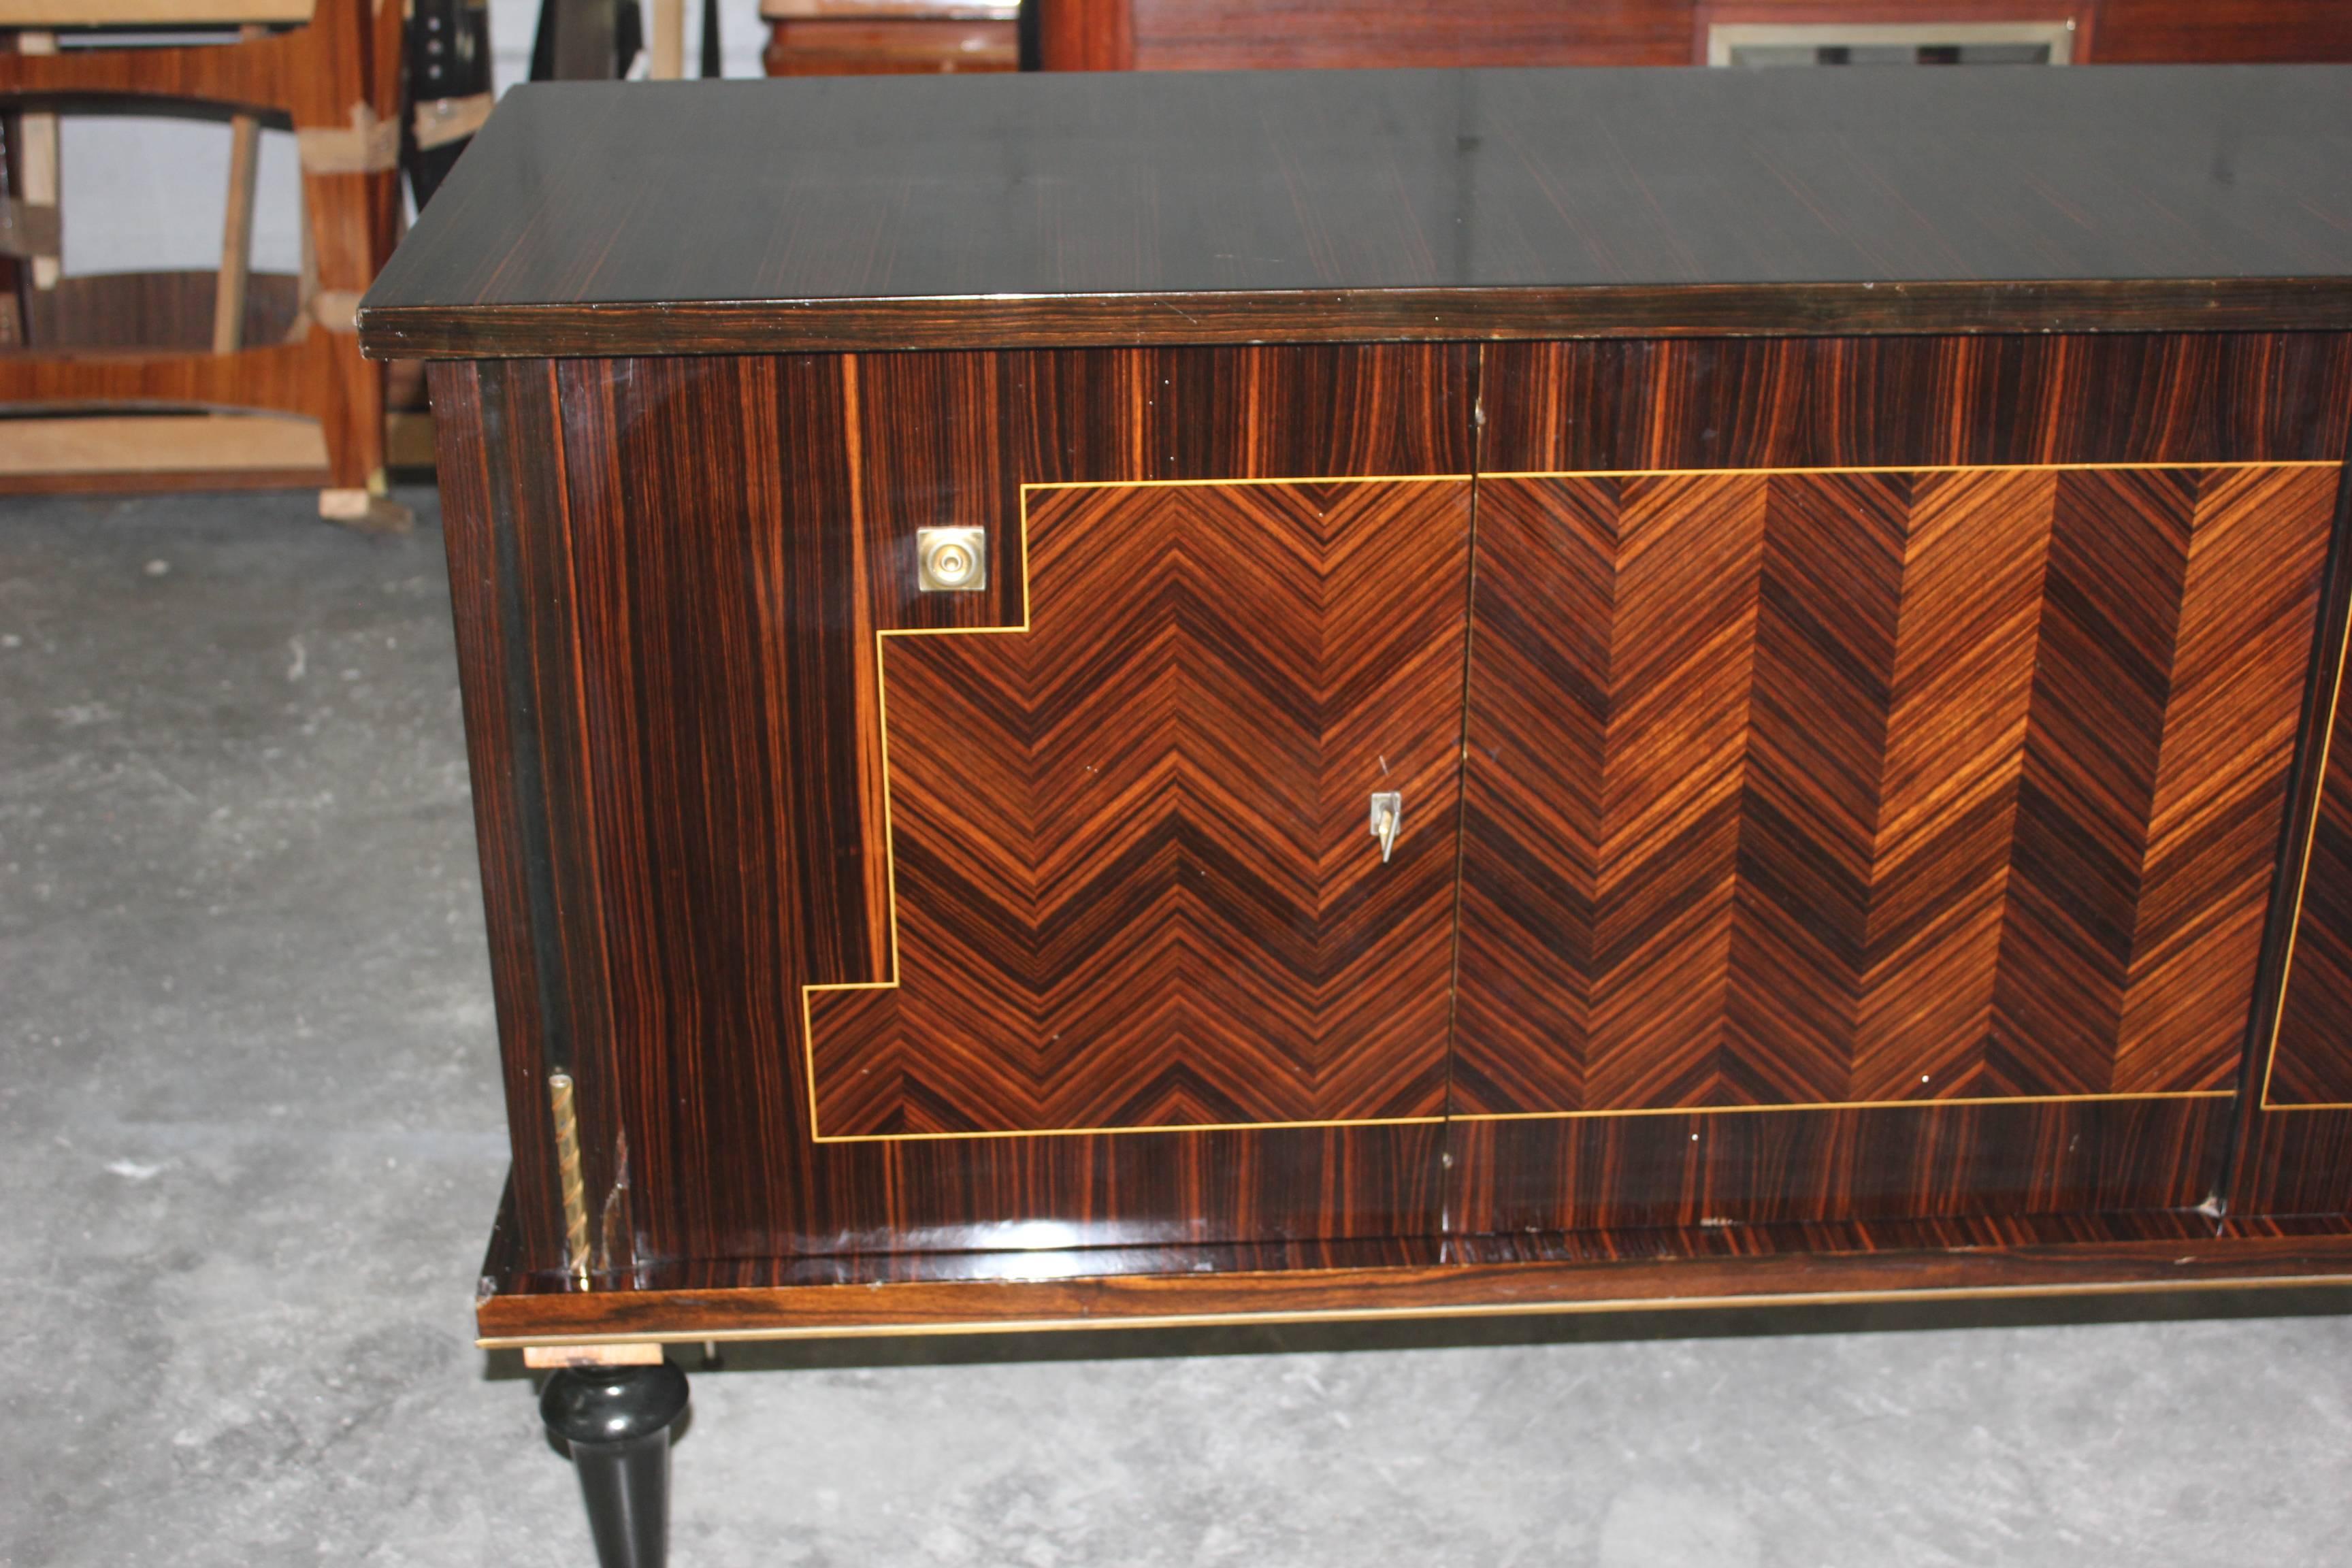 A French Art Deco Sideboard / Buffet Macassar ebony zigzag design , circa 1940s. high gloss finish and Finished interior.